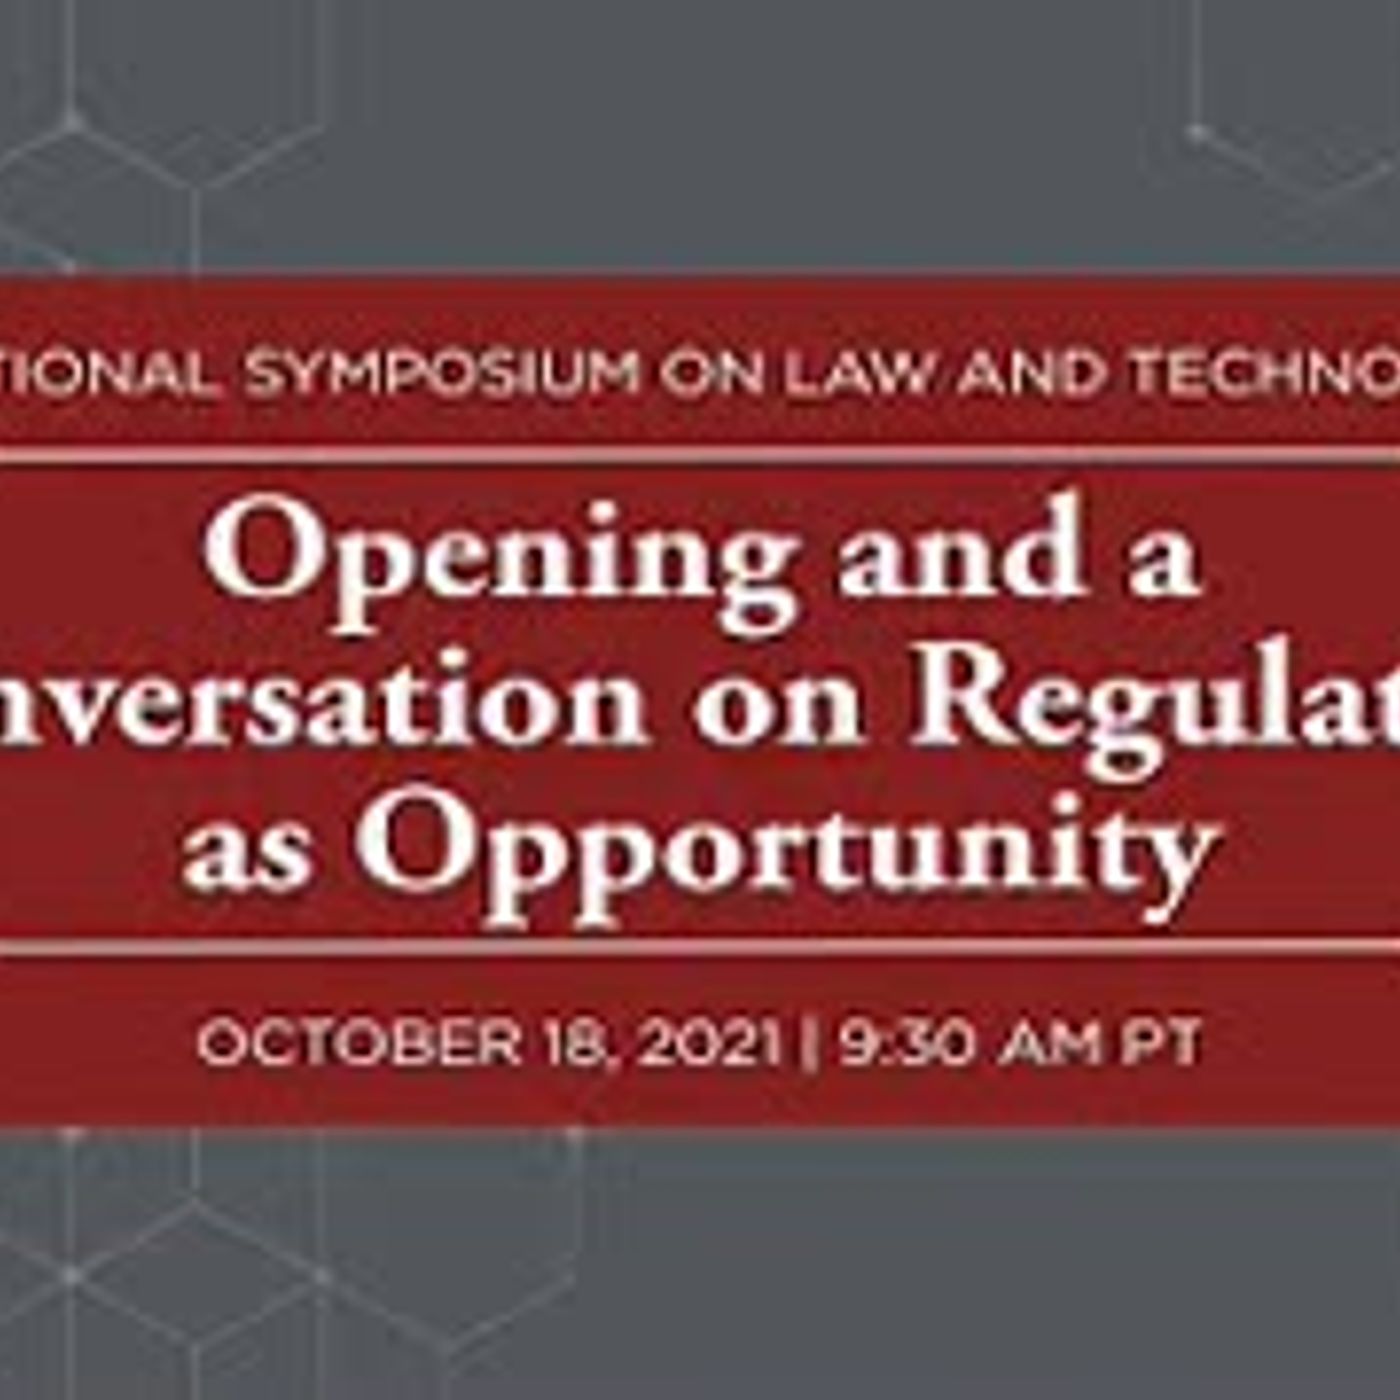 Opening and a Conversation on Regulation as Opportunity